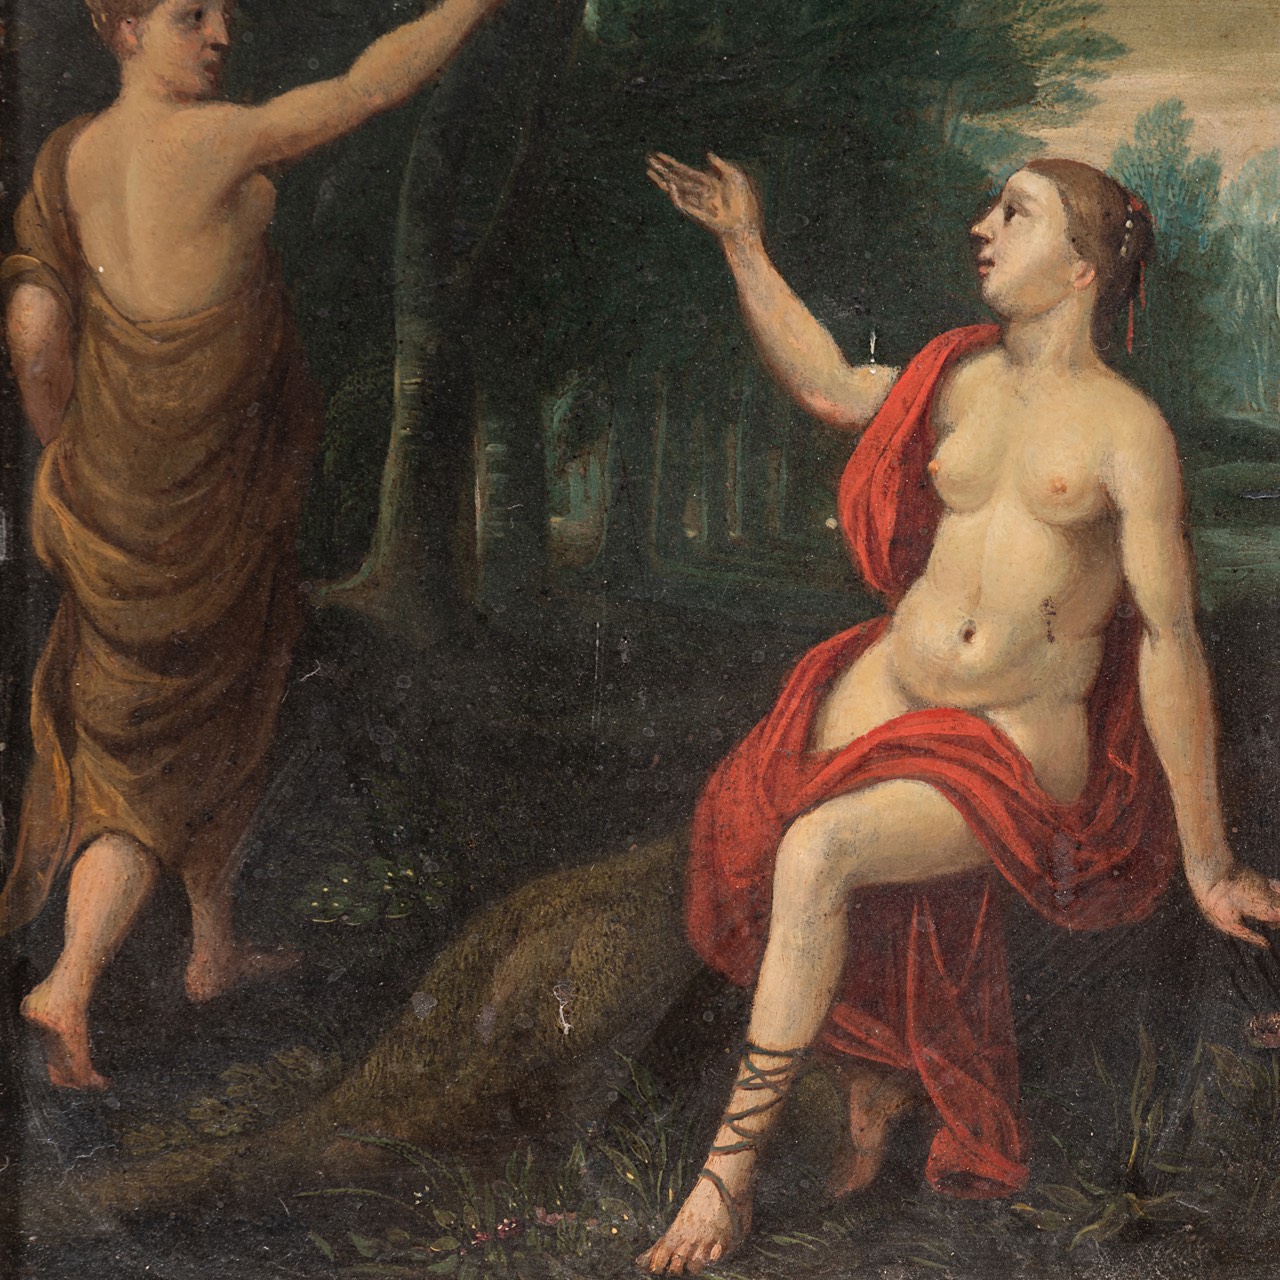 Two female Antique figures in a wooded landscape, Antwerp School, 17thC, oil on copper 21 x 16 cm. ( - Image 5 of 5